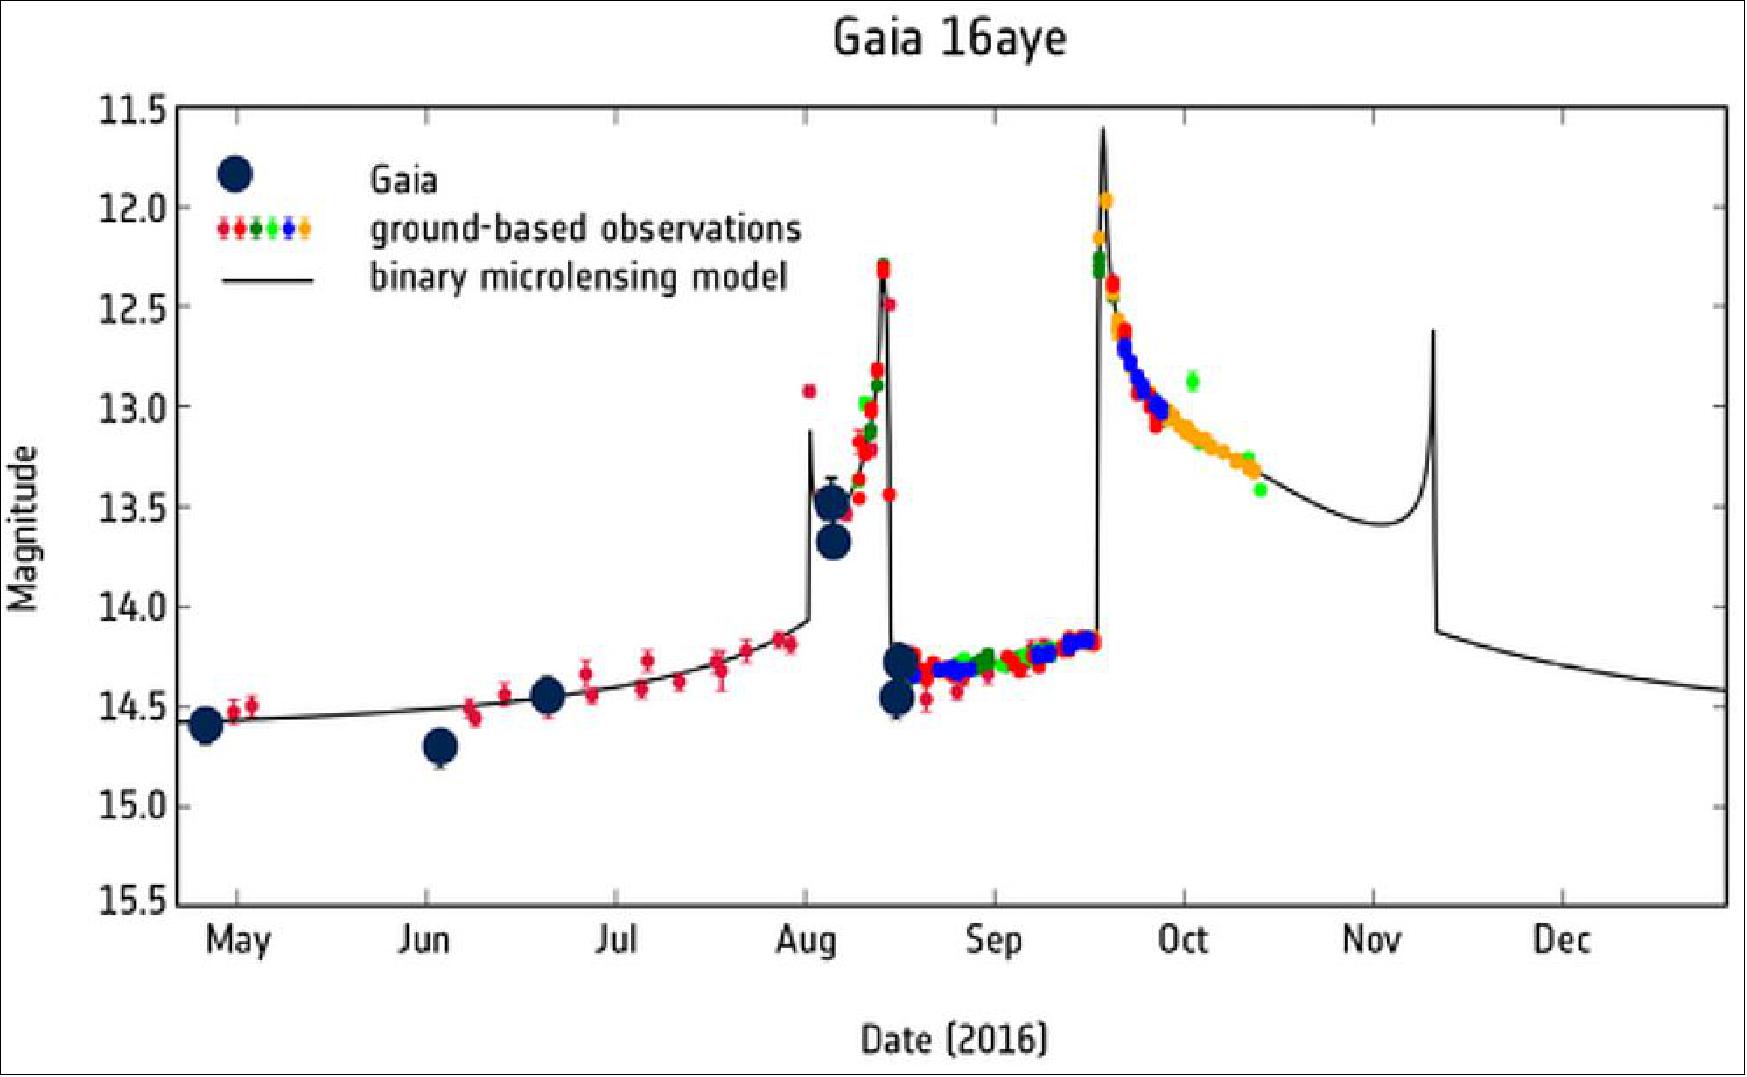 Figure 78: Variations of brightness of the star Gaia 16aye caused by a microlensing event, as a massive object passed across its line of sight. The Gaia Photometric Science Alerts Team nicknamed this star Ayers Rock, after the famous landmark in Australia [image credit: ESA/Gaia/DPAC, P. Mroz, L. Wyrzykowski, K. A. Rybicki (Warsaw)]